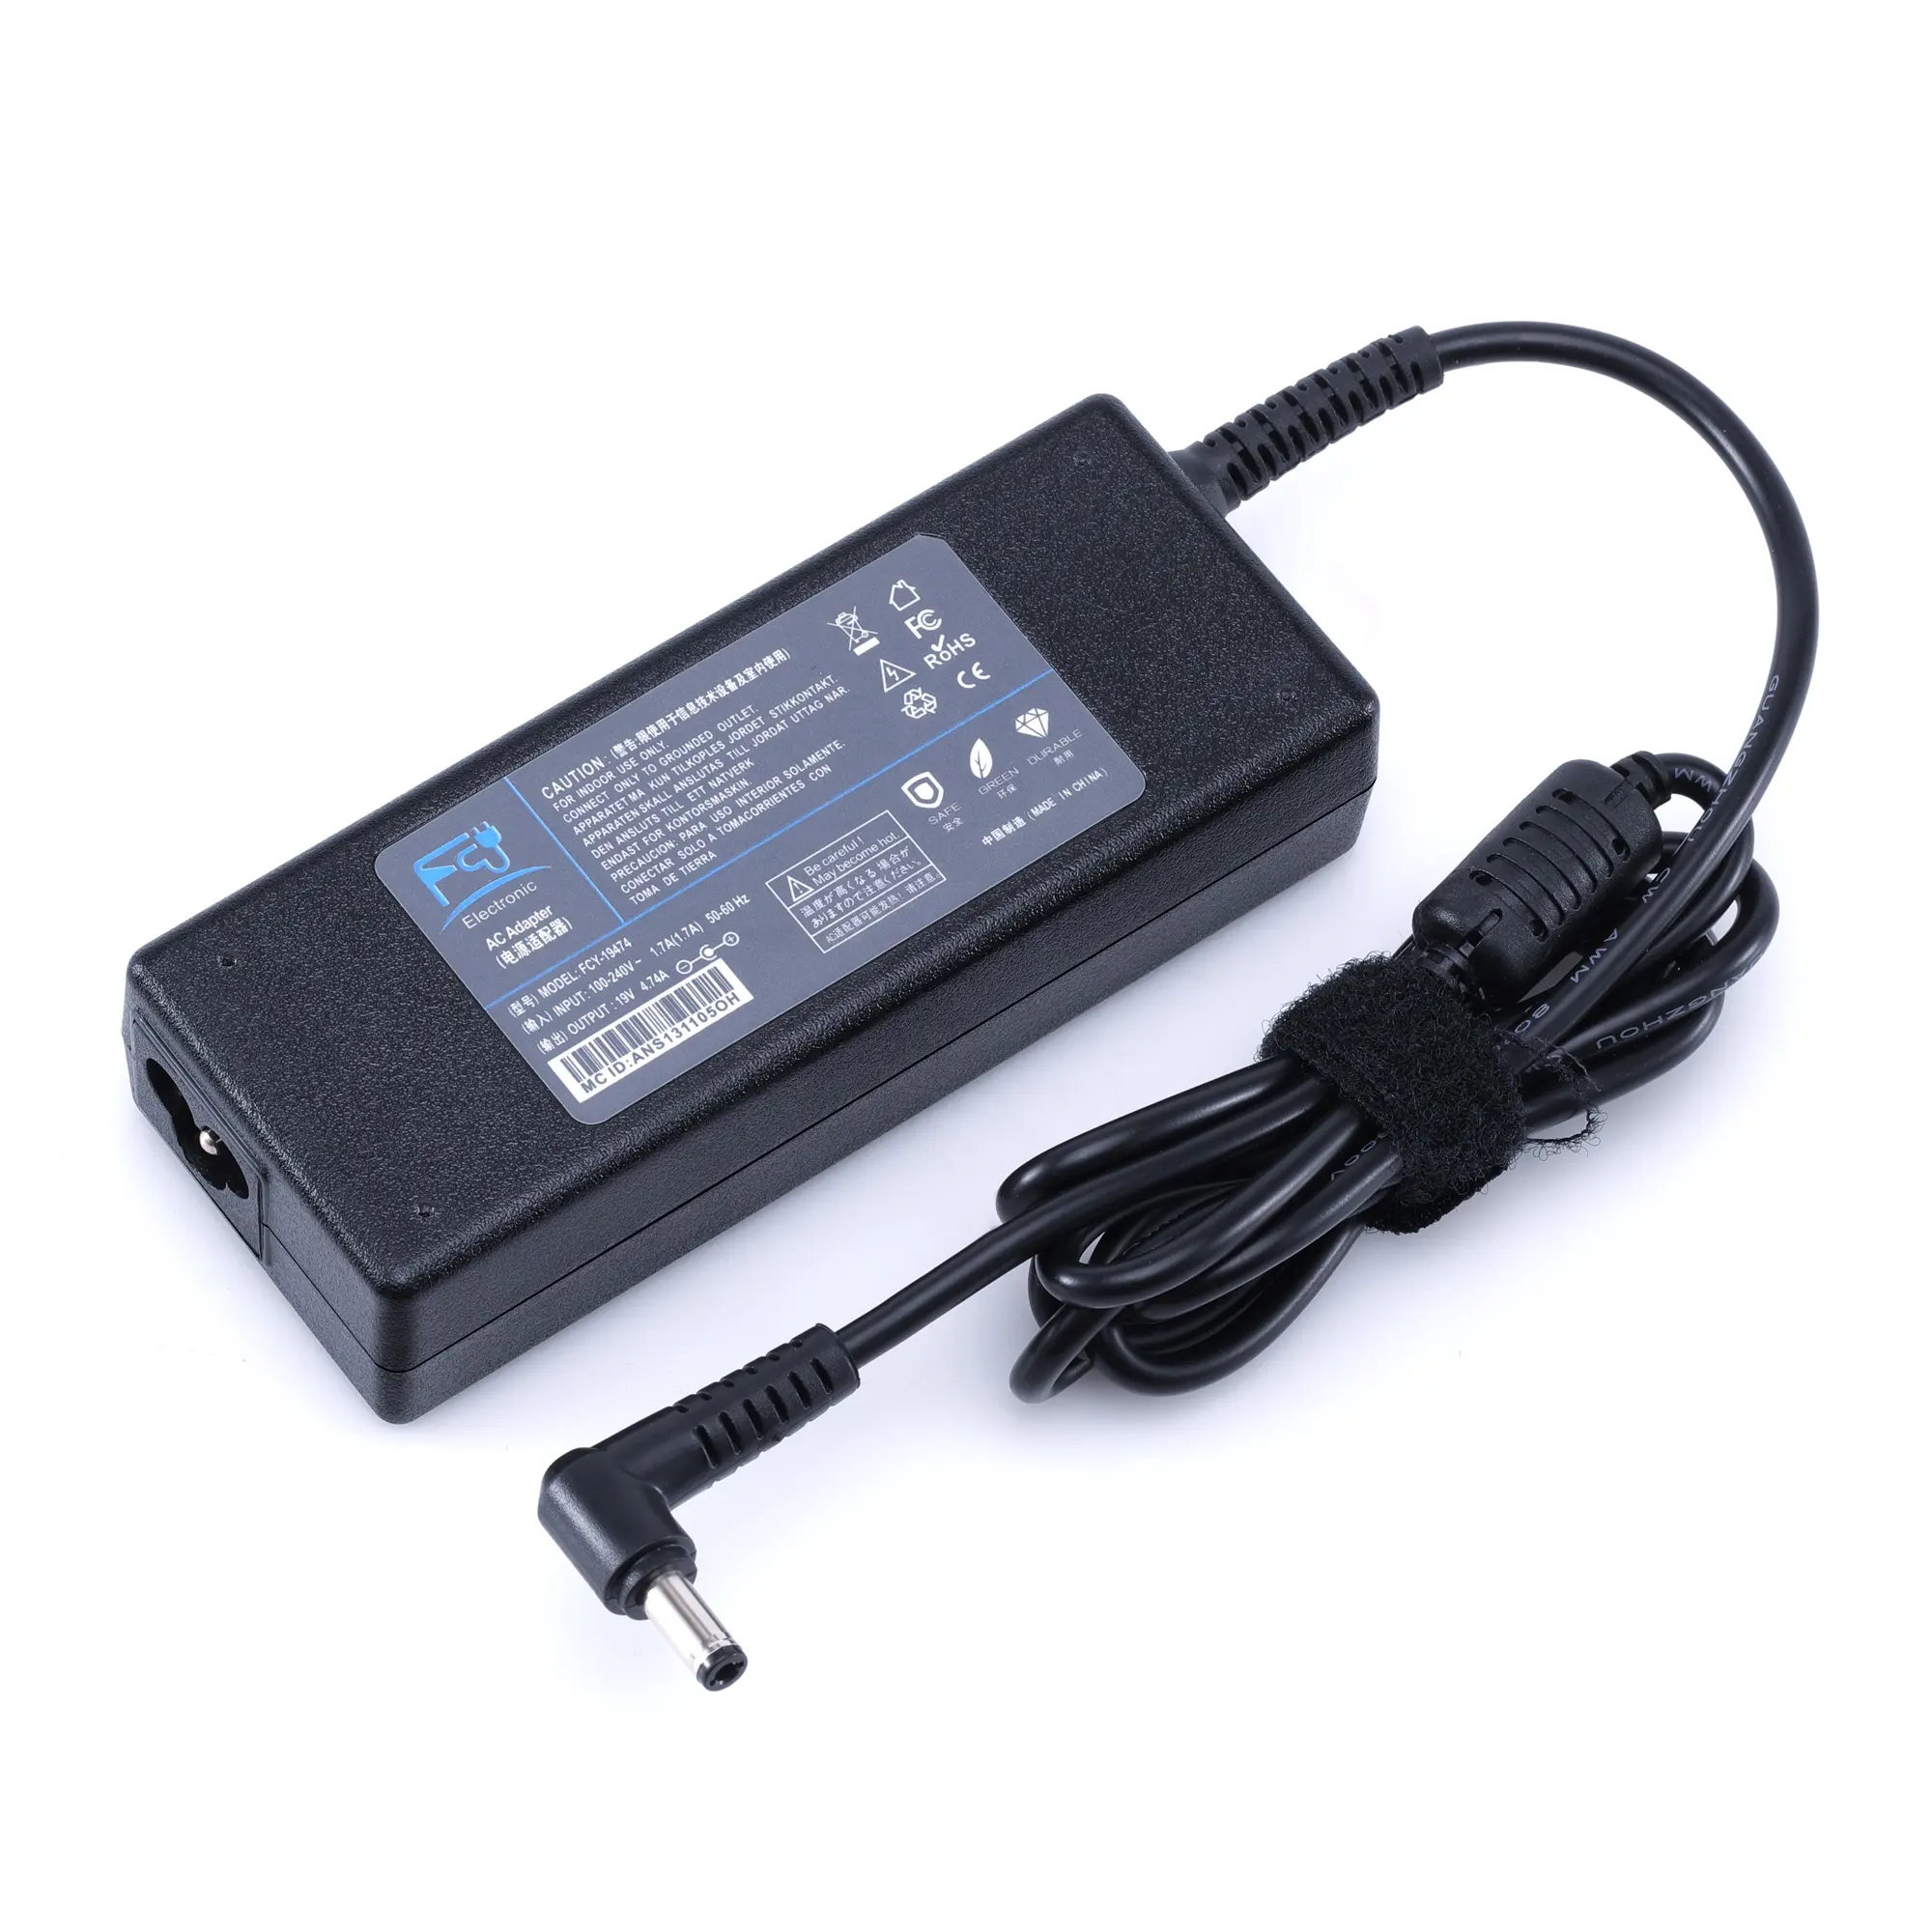 19V 4.74A 90W Universal AC Power Adapter Laptop Power Supply Adapter Charger For Lenovo / HP / Toshiba / Dell / Asus